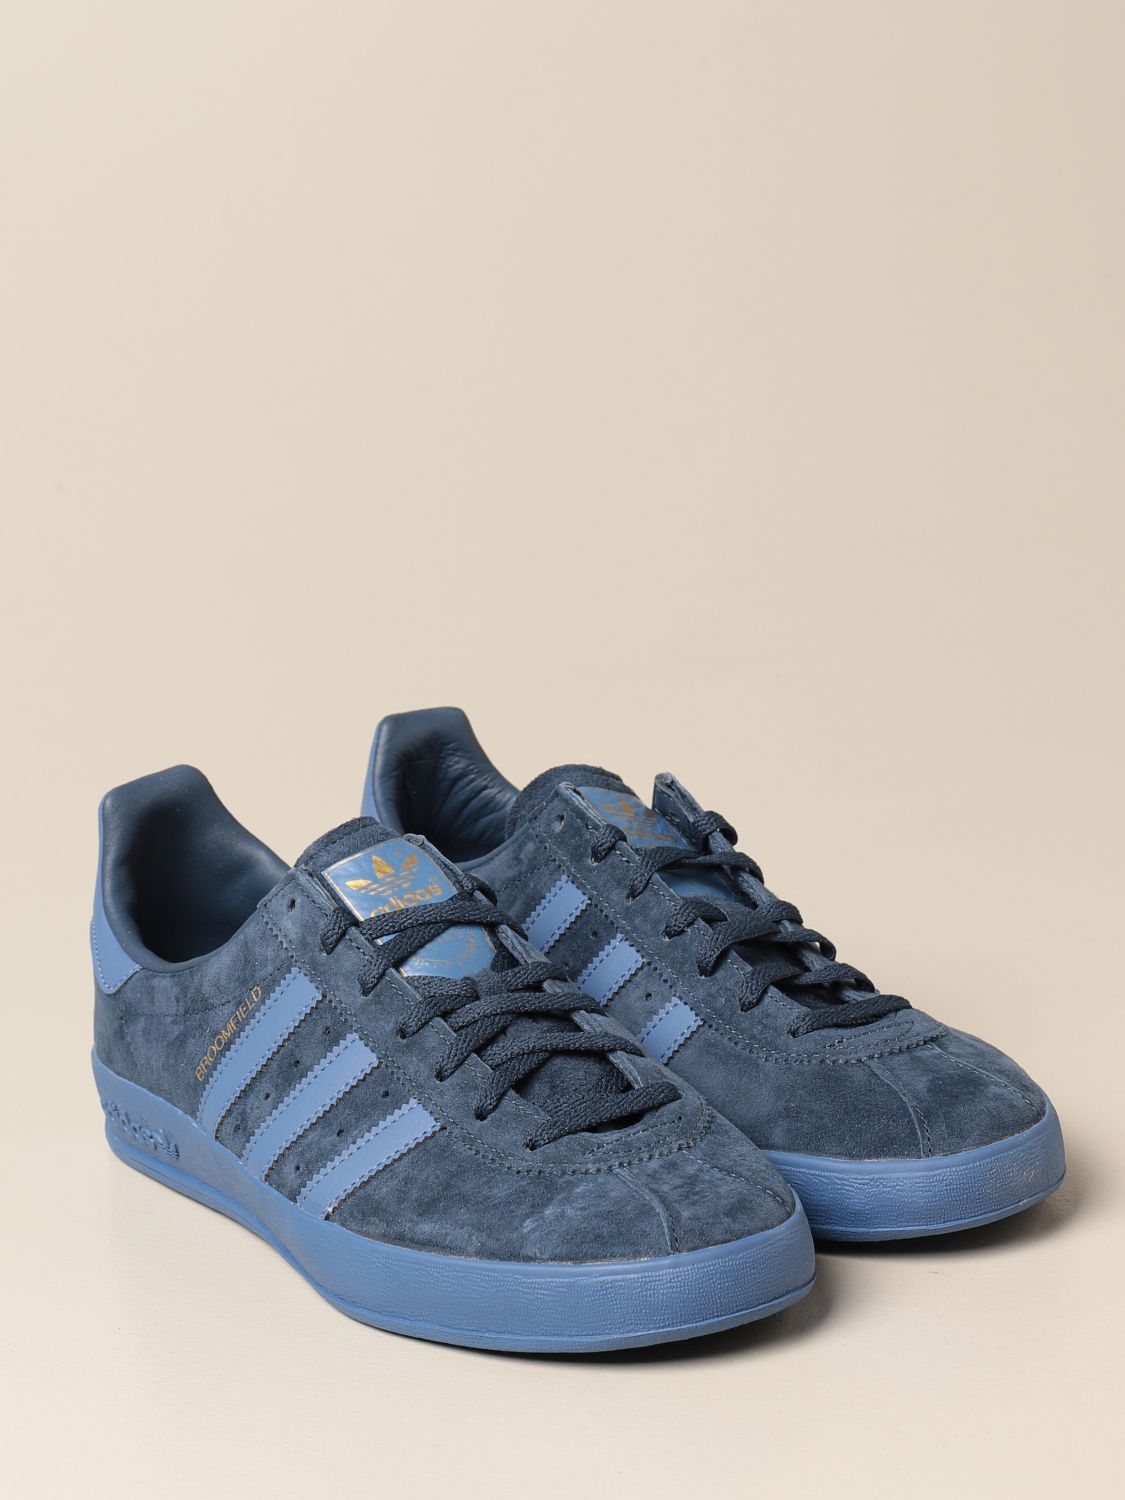 oficina postal Suavemente Larry Belmont ADIDAS ORIGINALS: Broomfield sneakers in suede and synthetic leather - Blue  | Adidas Originals sneakers FX5678 online on GIGLIO.COM